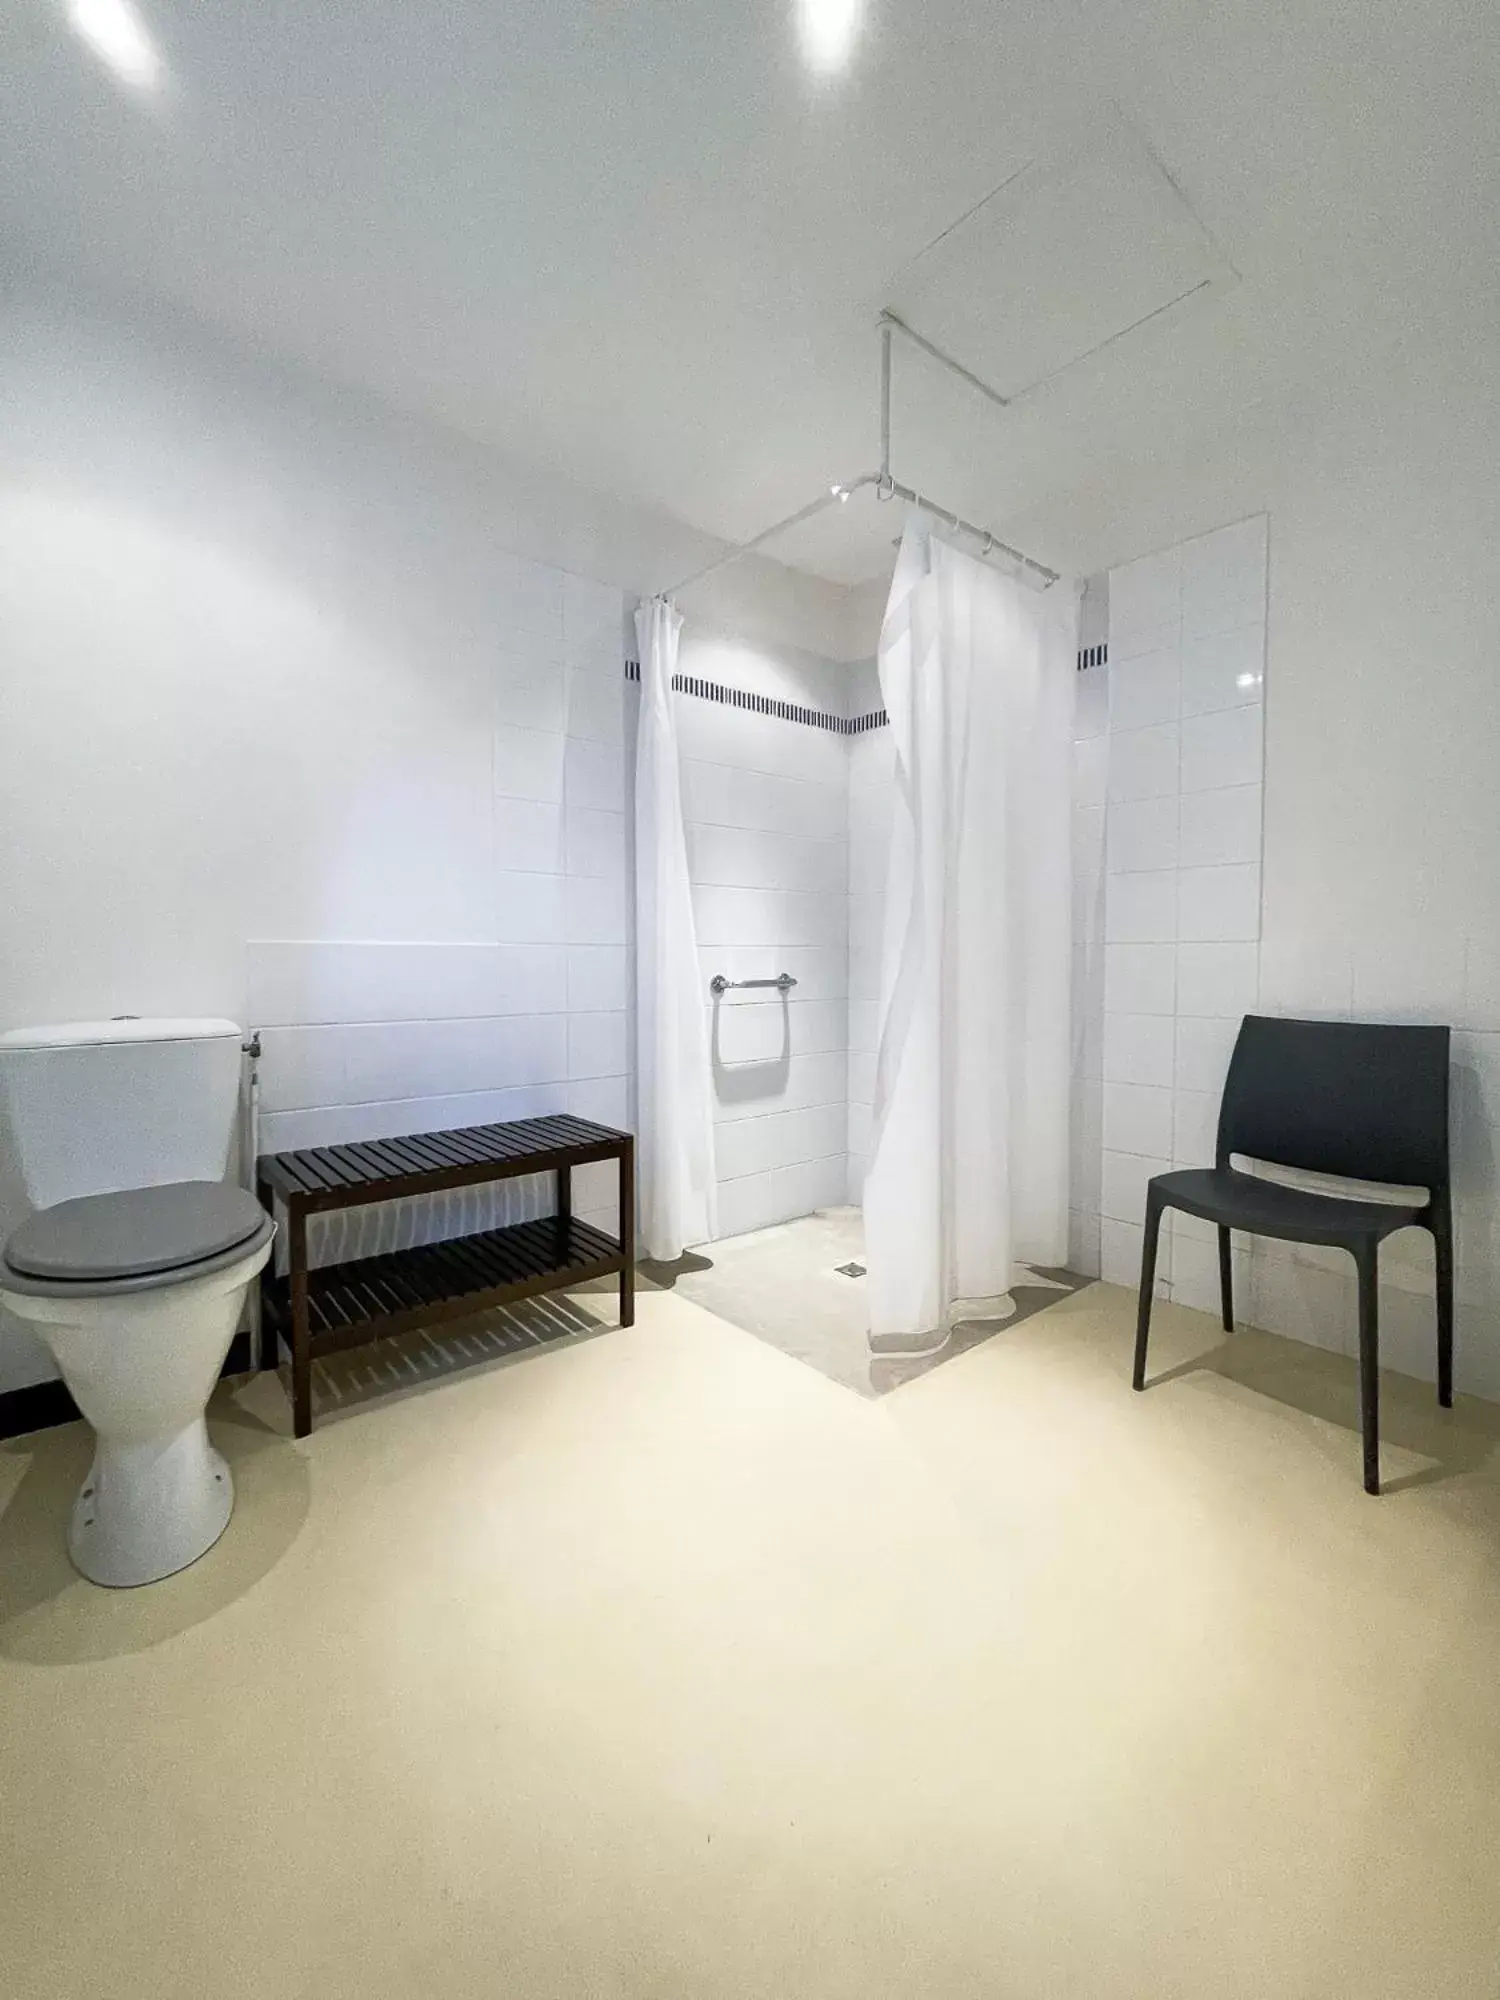 Facility for disabled guests, Bathroom in Hotel Le Clocher